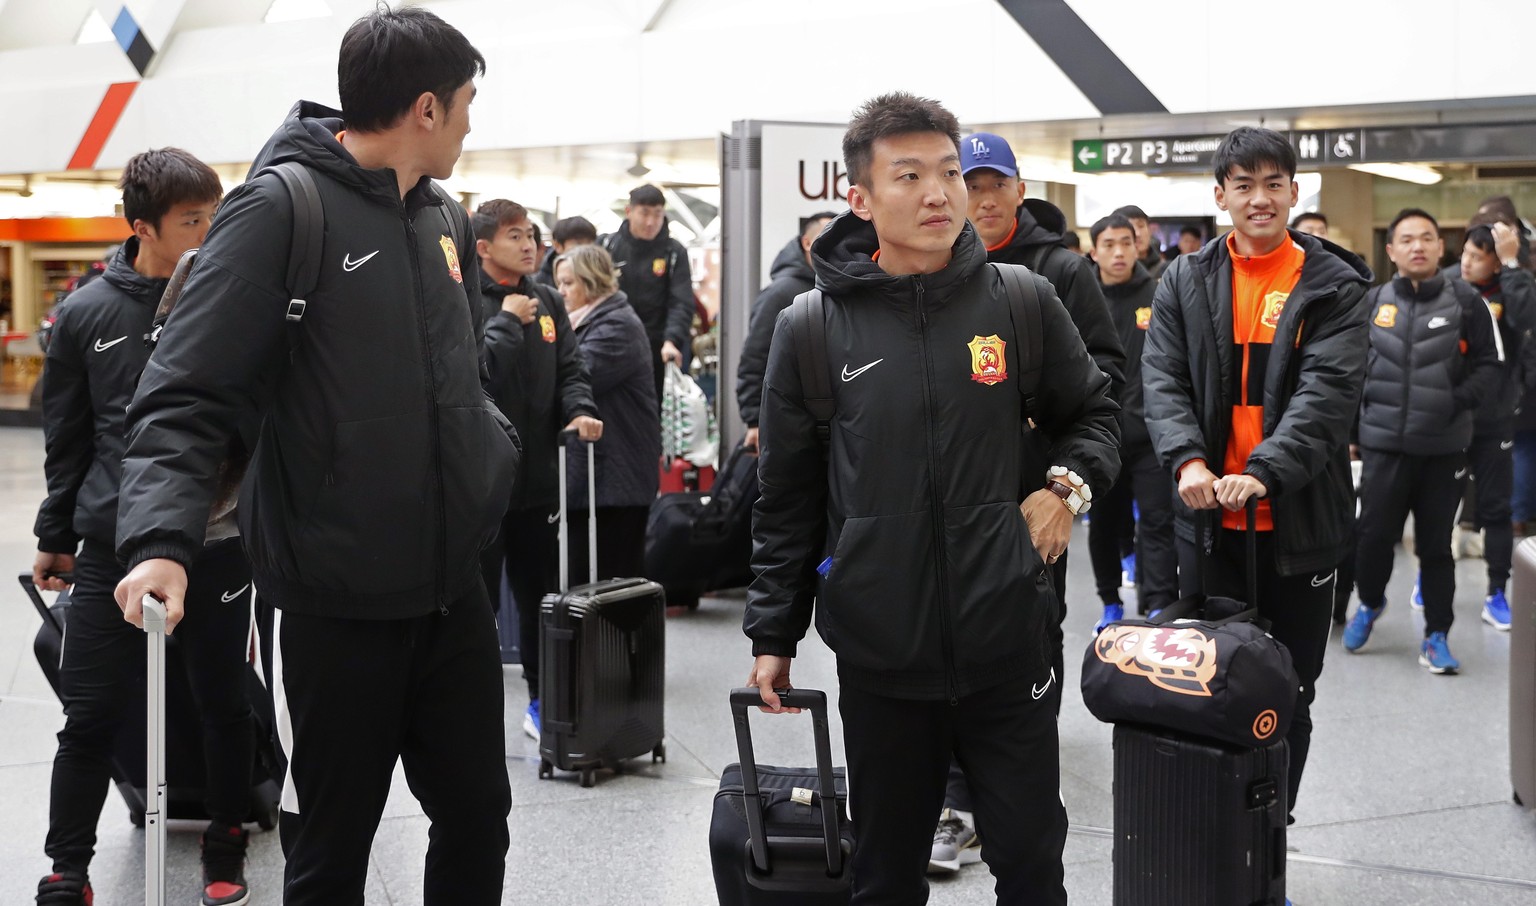 Players of the Chinese Super League team Wuhan Zall arrive at the Atocha train station in Madrid, Spain, Saturday, Feb. 29, 2020. The Chinese first-division soccer club from the city of Wuhan enters i ...